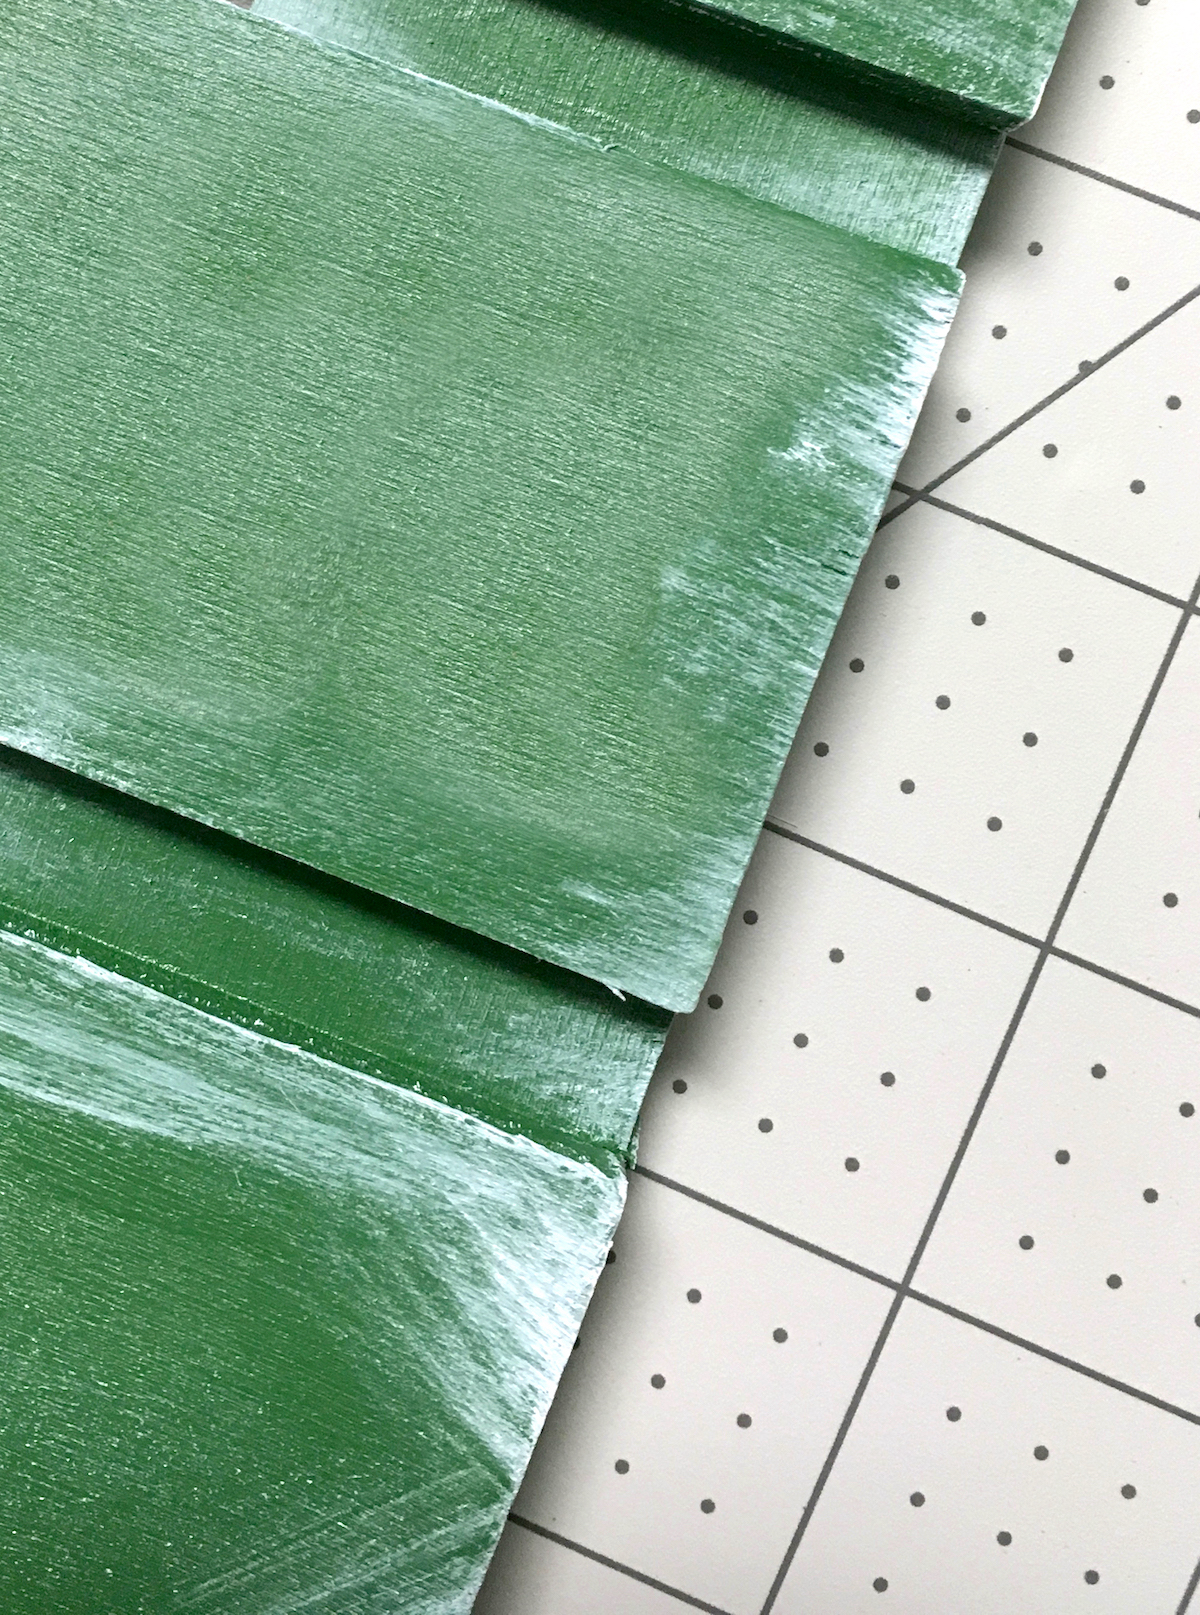 Distressing the edge of the green pallet with white paint